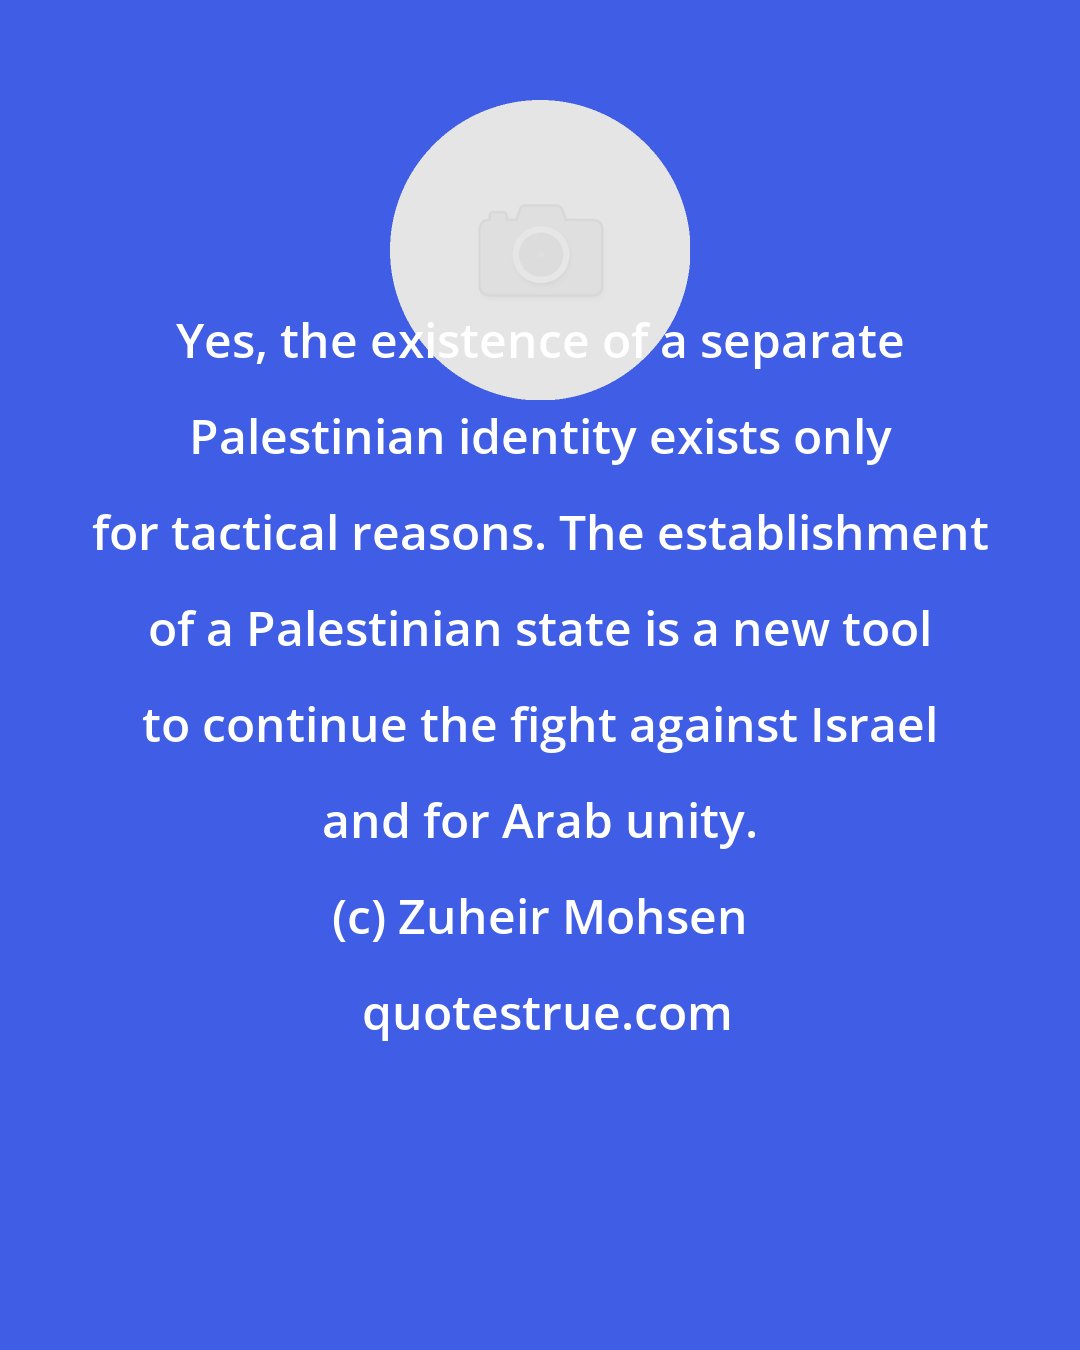 Zuheir Mohsen: Yes, the existence of a separate Palestinian identity exists only for tactical reasons. The establishment of a Palestinian state is a new tool to continue the fight against Israel and for Arab unity.